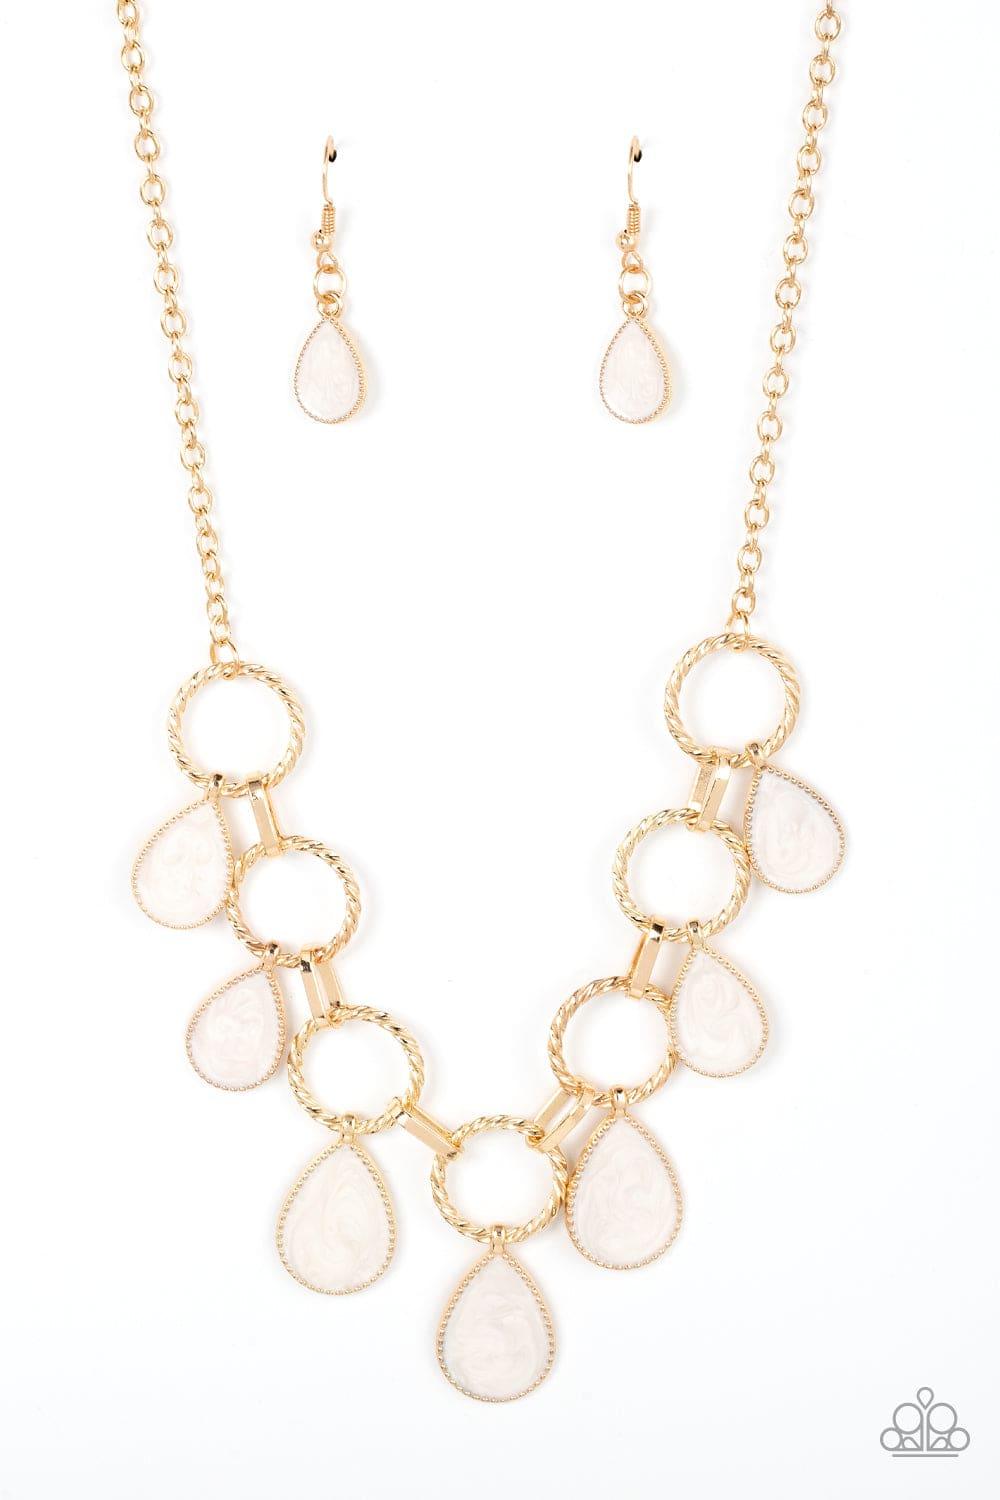 Paparazzi Accessories - Golden Glimmer - Gold Necklace - Bling by JessieK